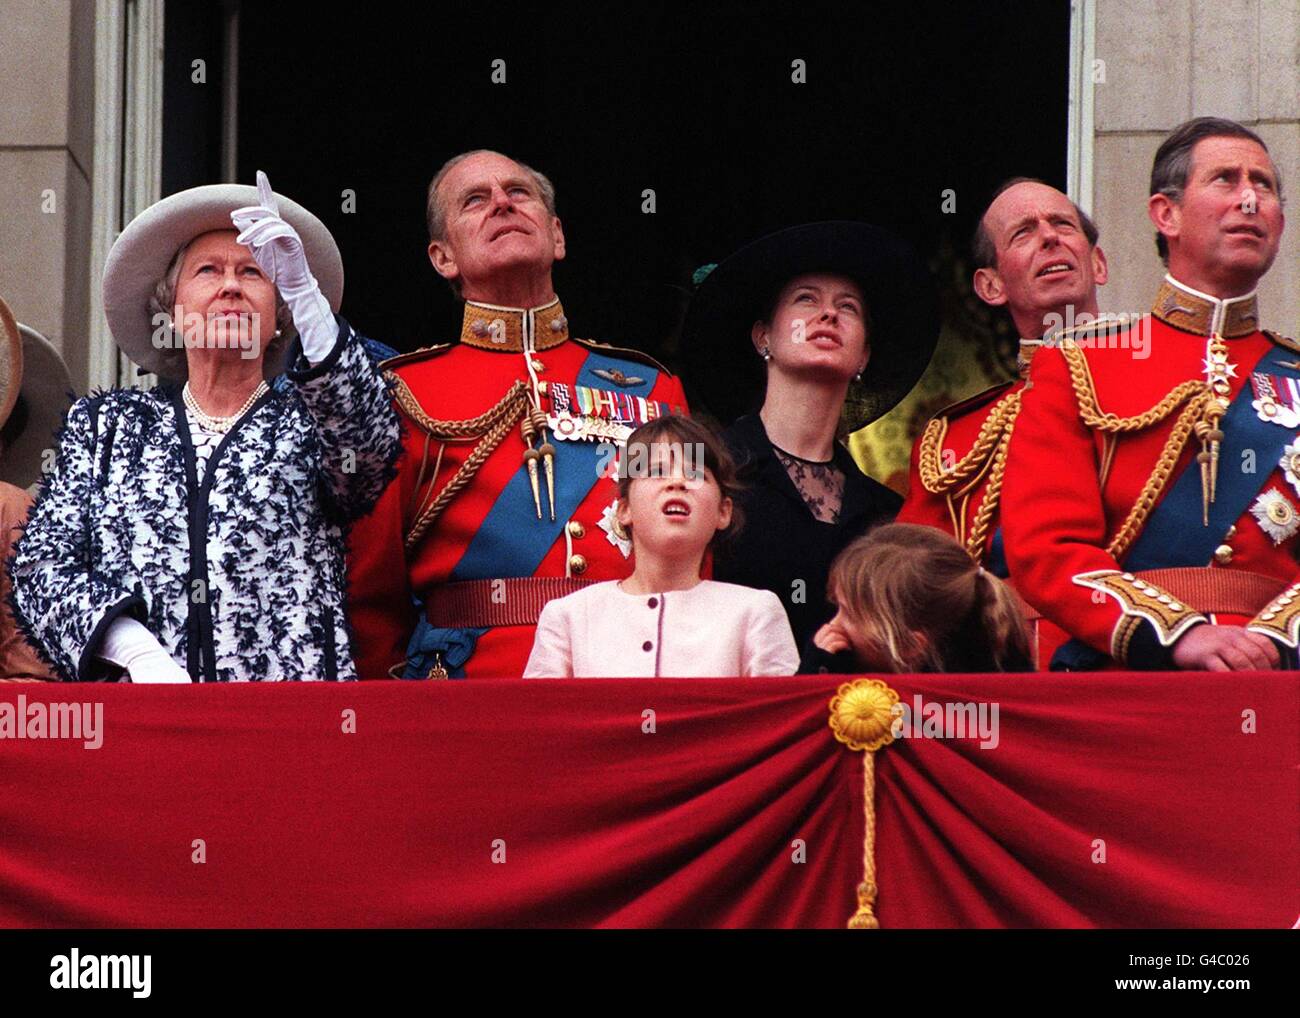 The Queen and the Duke of Edinburgh watch the traditional fly-past from the balcony of Buckingham Palace following the Trooping of the Colour in honour of the Queen's official birthday today (Saturday). Left to right: The Queen, The Duke of Edinburgh, Princess Eugenie (pink dress), Lady Helen Taylor (dressed in black), unidentified young girl, The Duke of Kent and Prince Charles. See PA story ROYAL Trooping. WPA rota picture by John Stillwell/PA Stock Photo